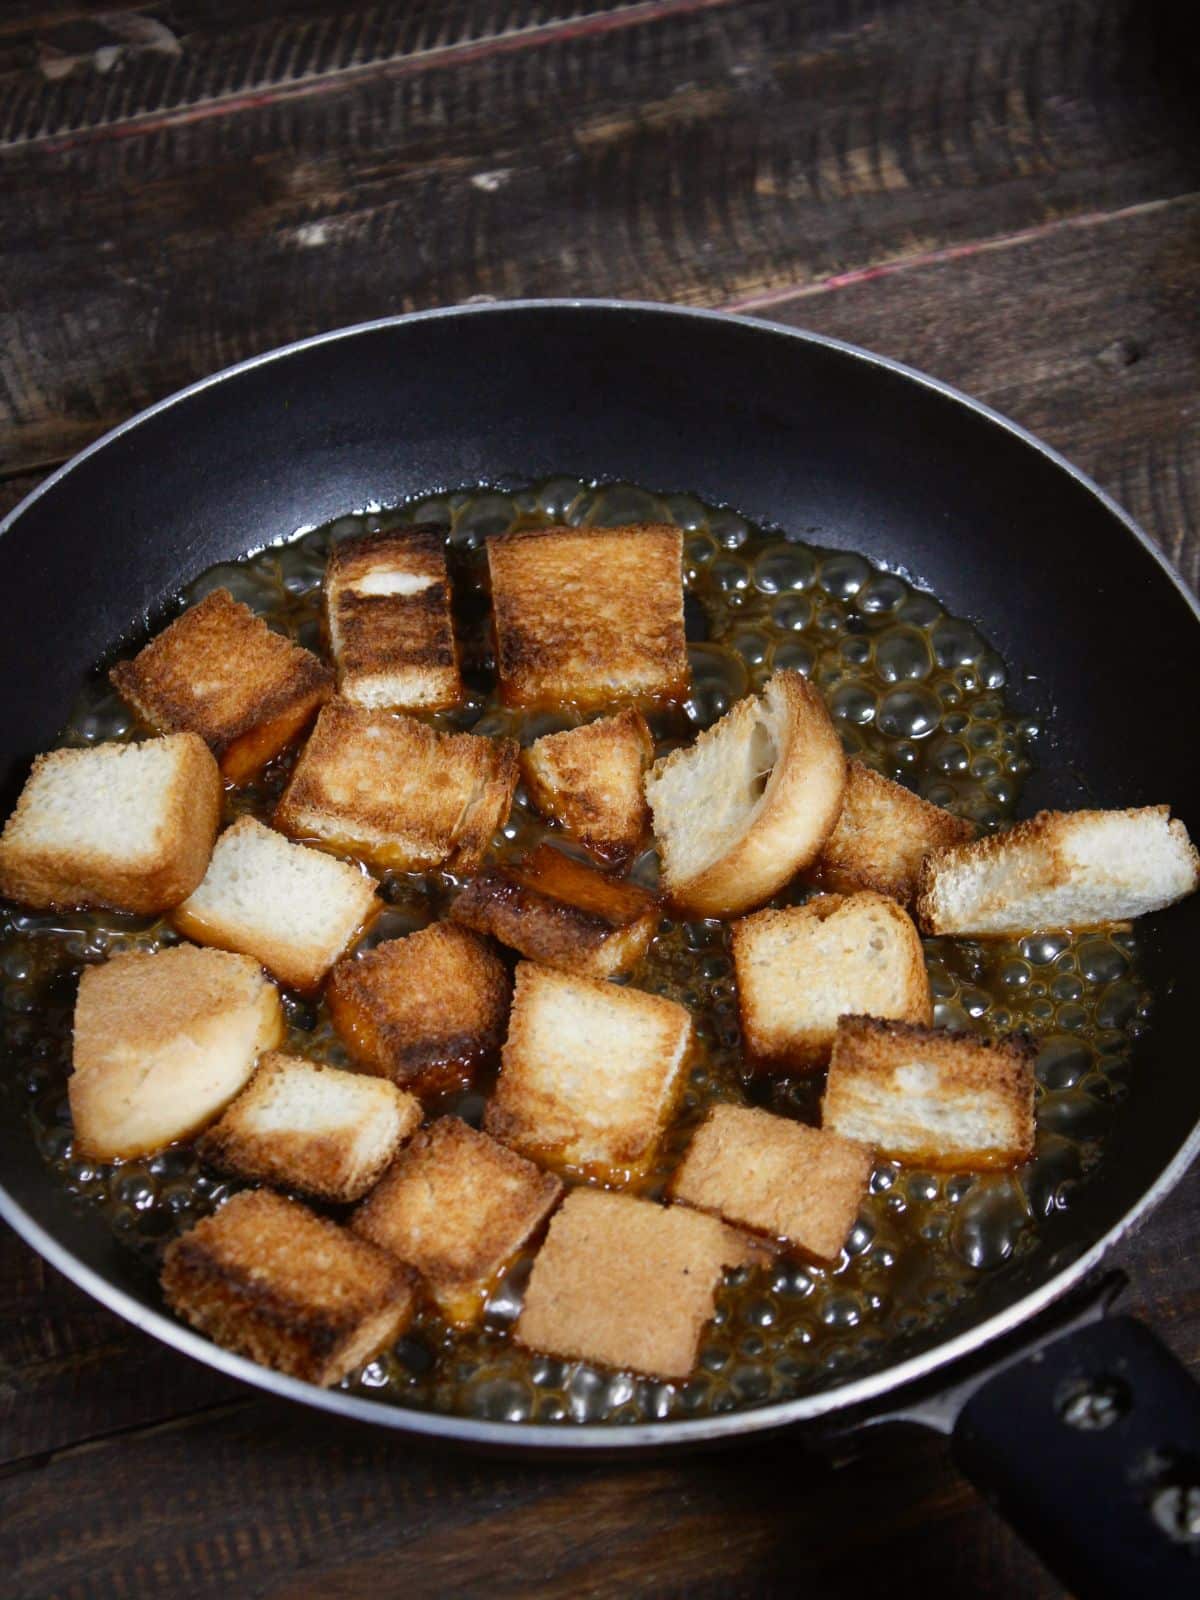 add roasted bread cubes into the pan and mix well